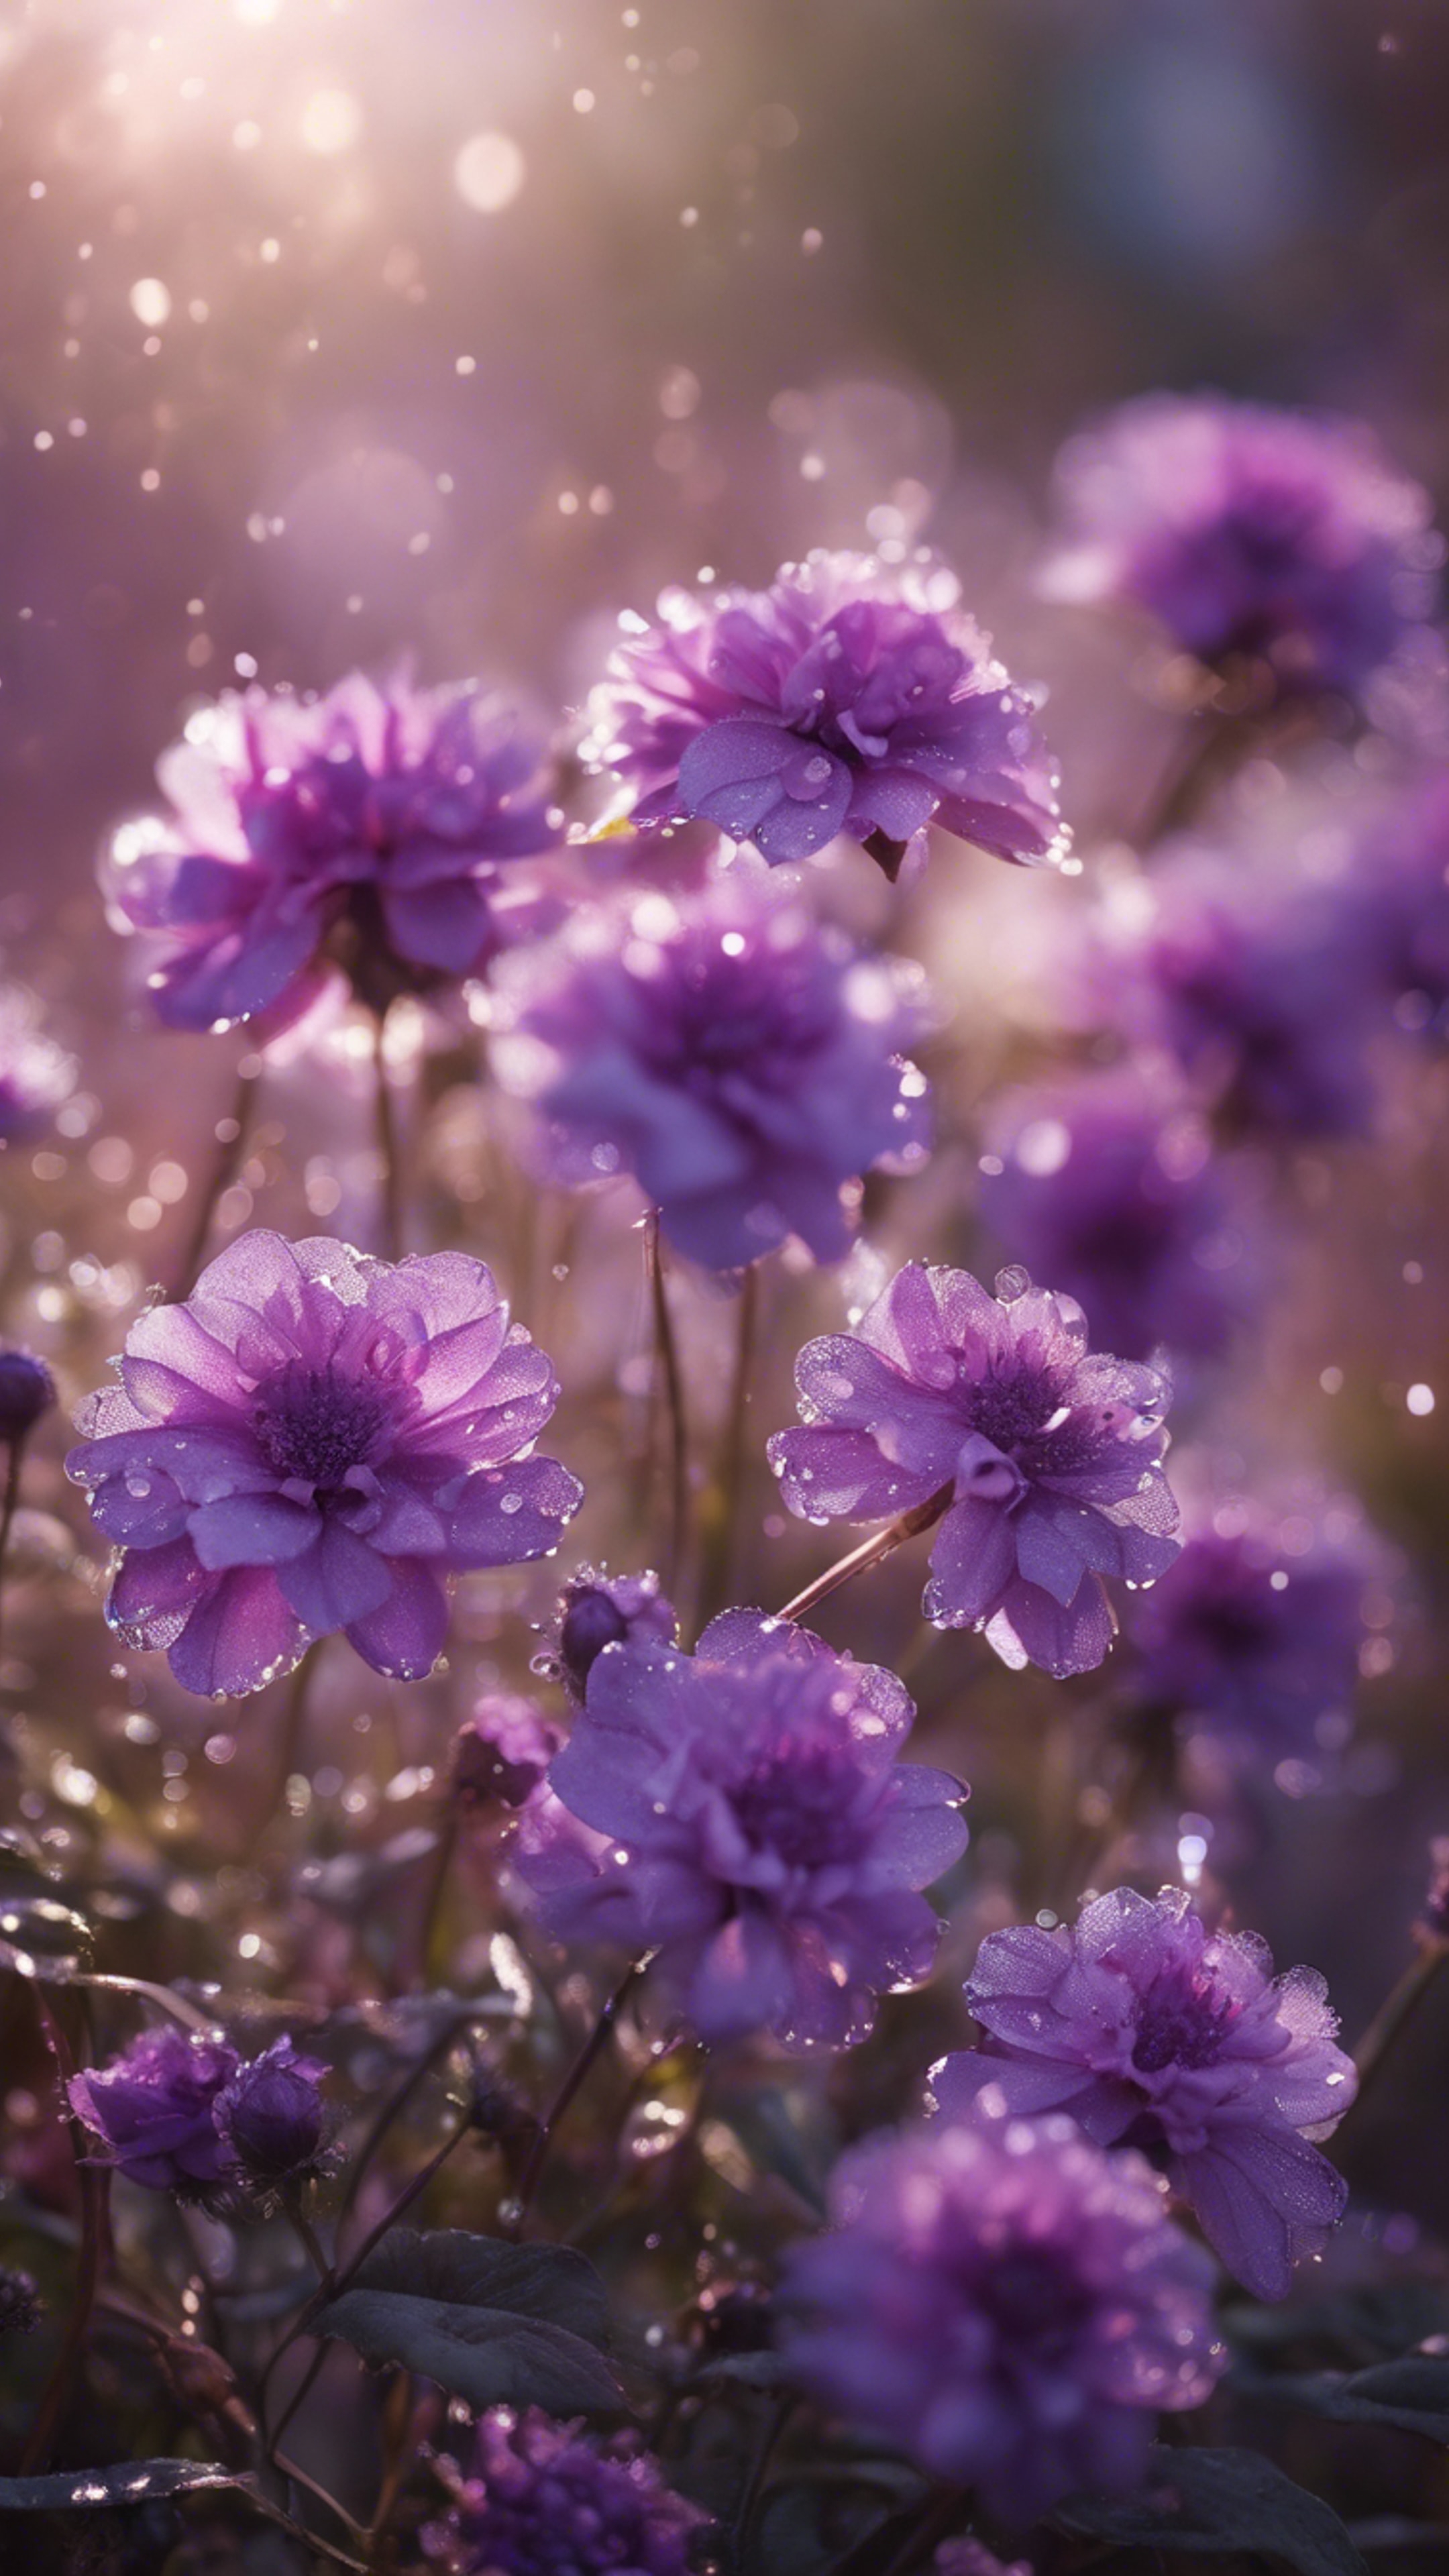 An impressive collage of purple flowers in full bloom, highlighted by sparkling morning dew. Behang[23d1df20d4e341739cf3]